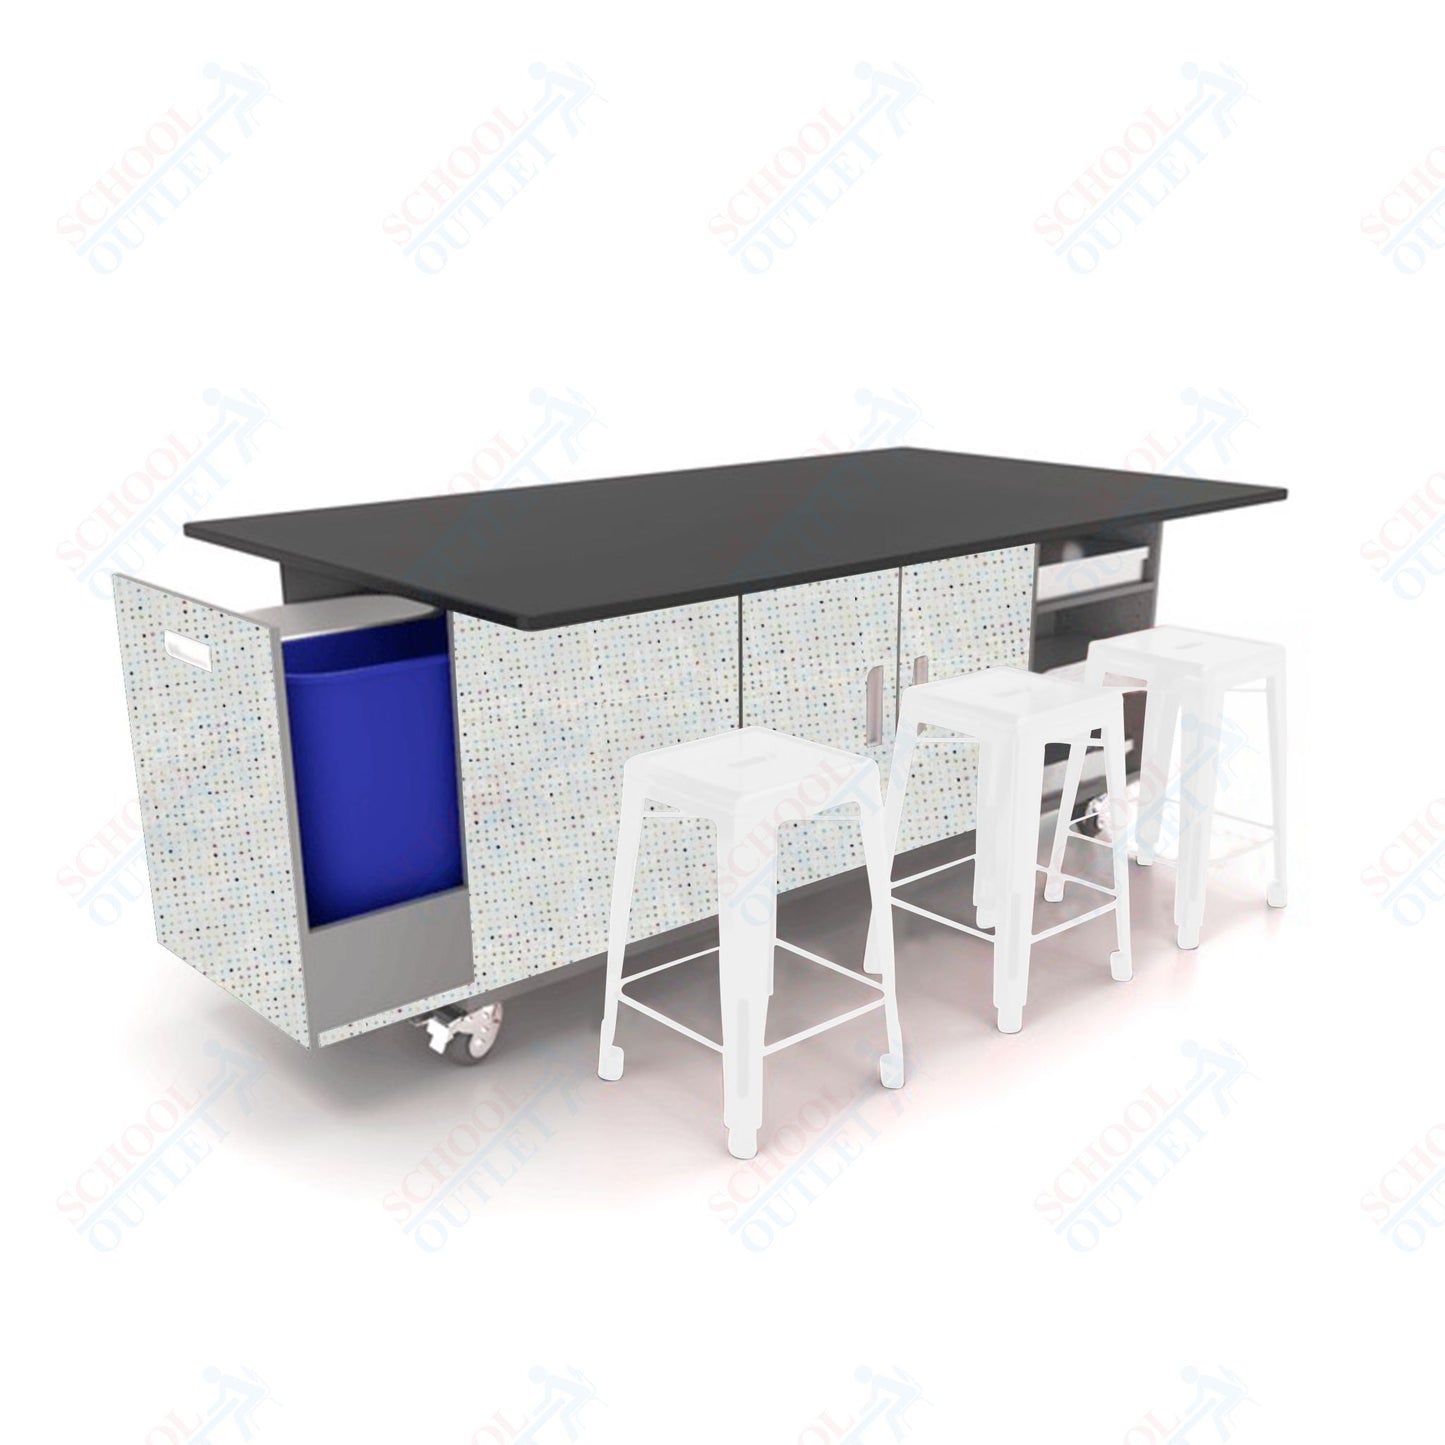 CEF ED Original Table 36"H Chemical Resistant Top, Laminate Base with  6 Stools, Storage Bins, Trash Bins, and Electrical Outlets Included.